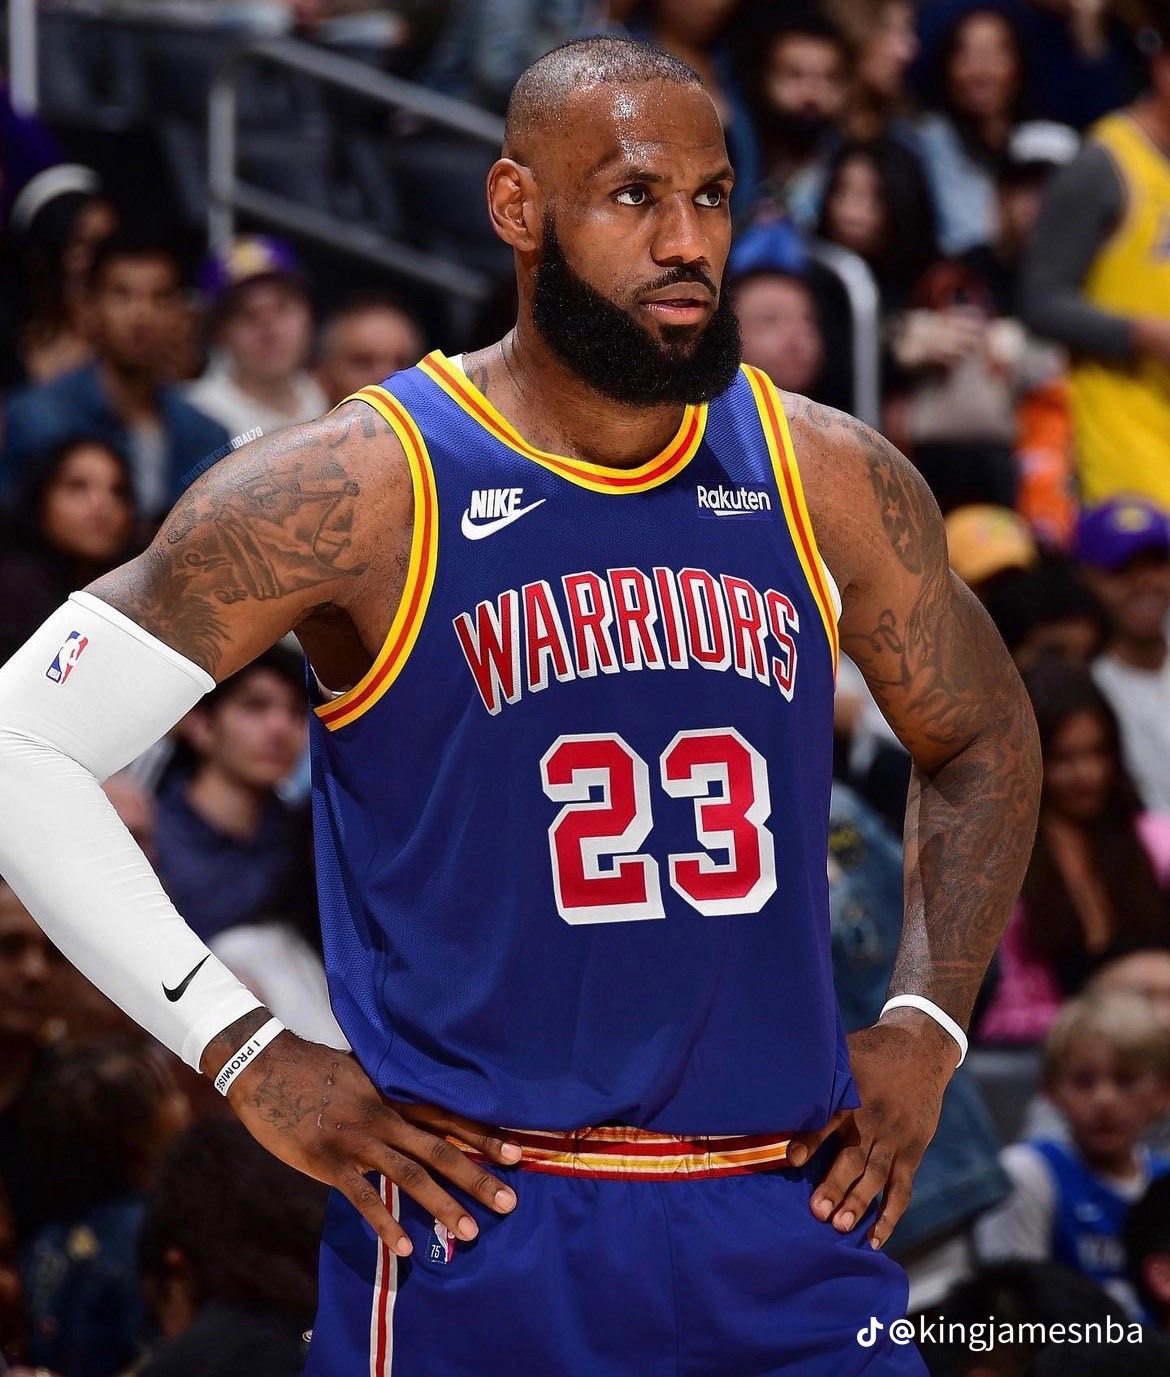 LeBron James switching jersey from No. 6 to No. 23 — again